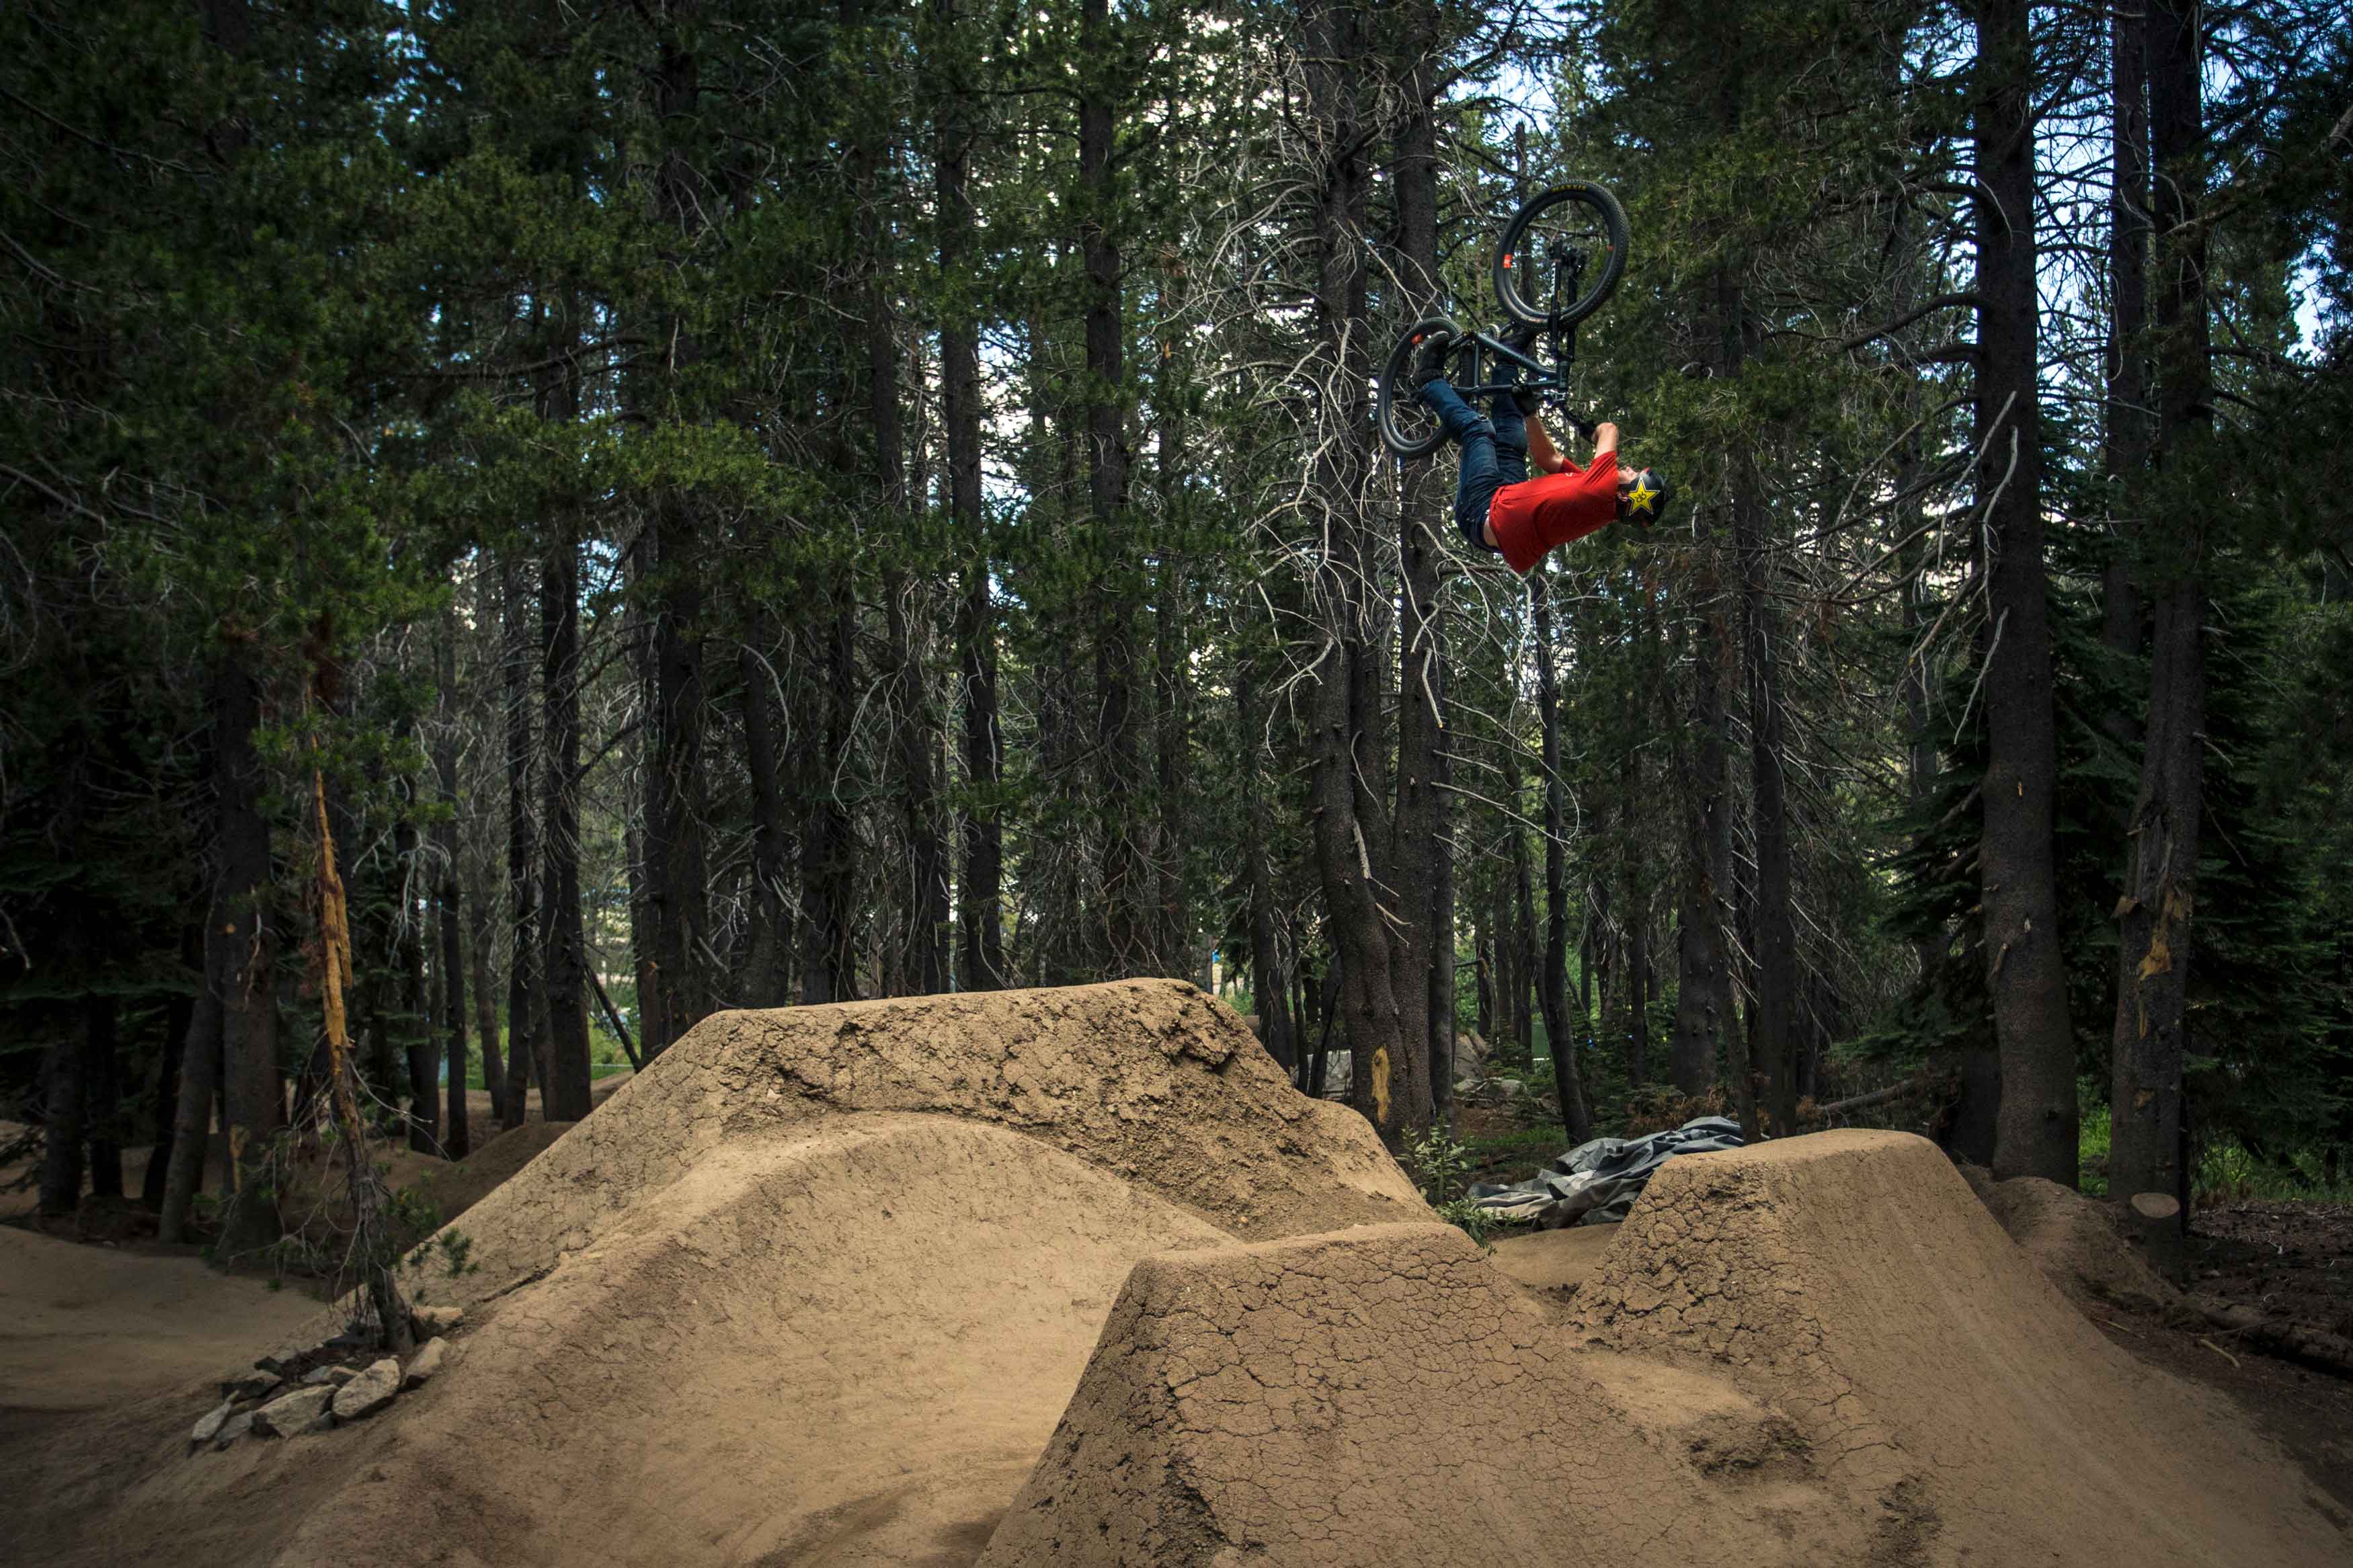 Greg Watts flipping out in Woodward